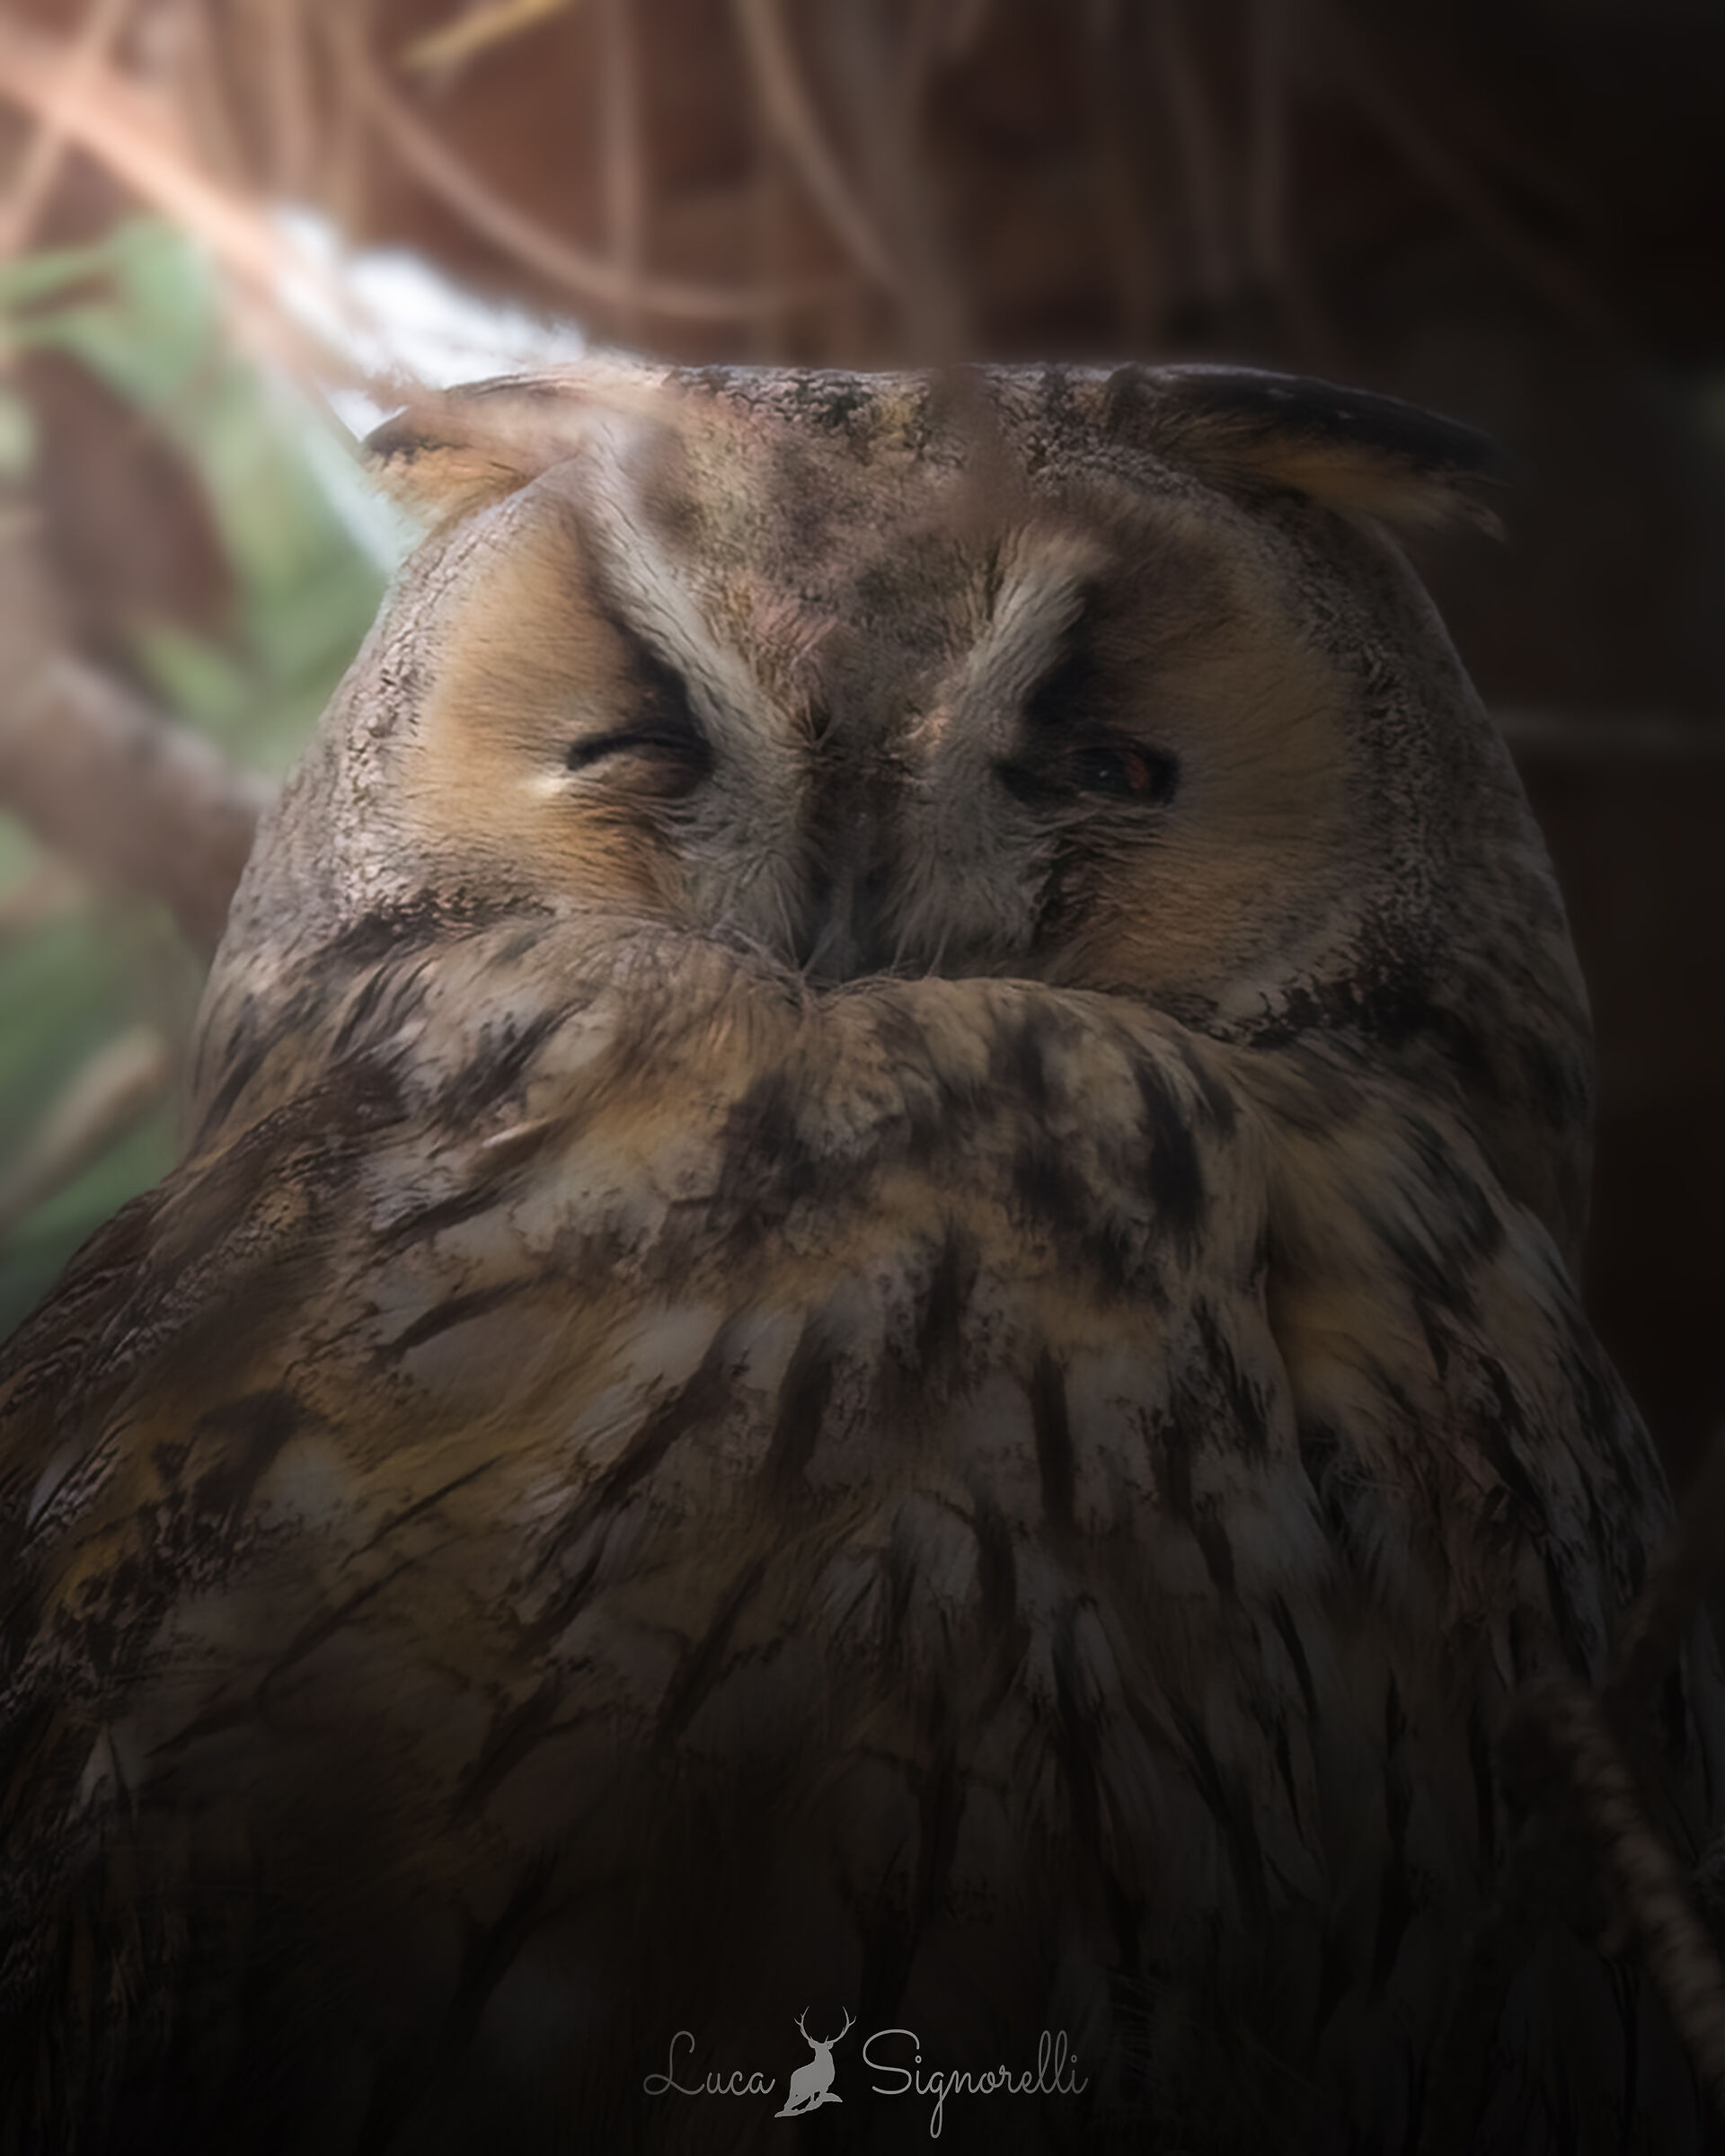 The wink of the Owl...